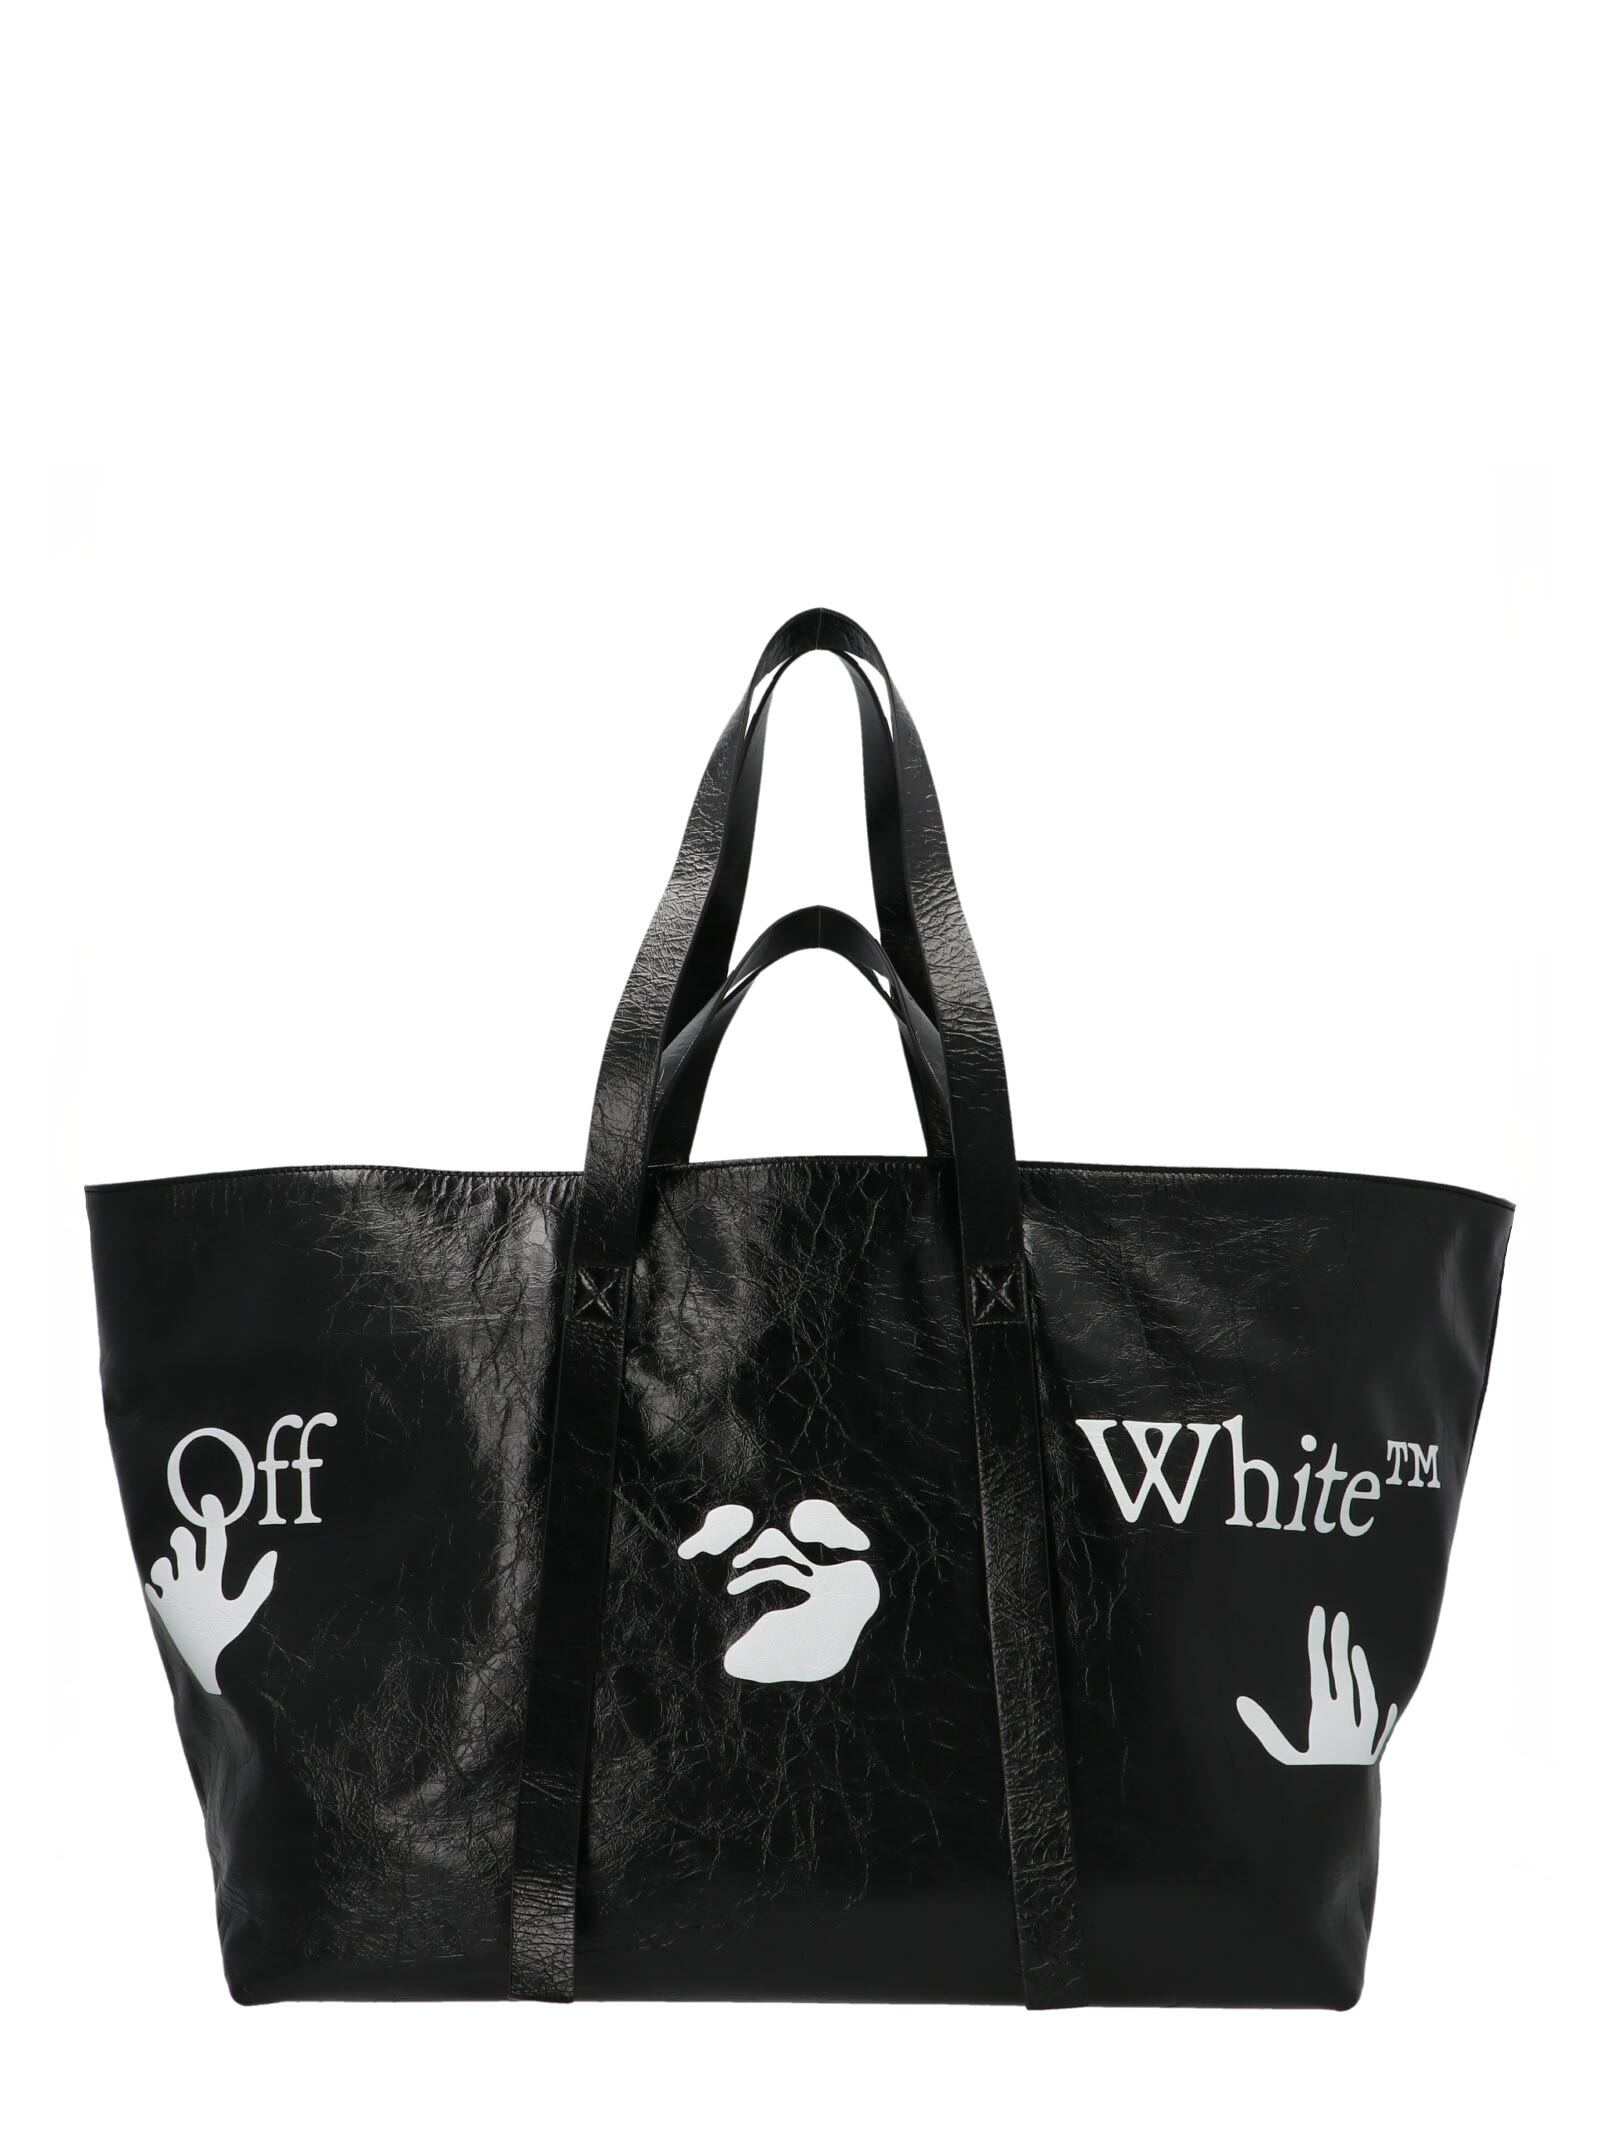 OFF-WHITE OFF-WHITE COMMERCIAL TOTE 45 BAG,OWNA094S21LEA0011001 1001